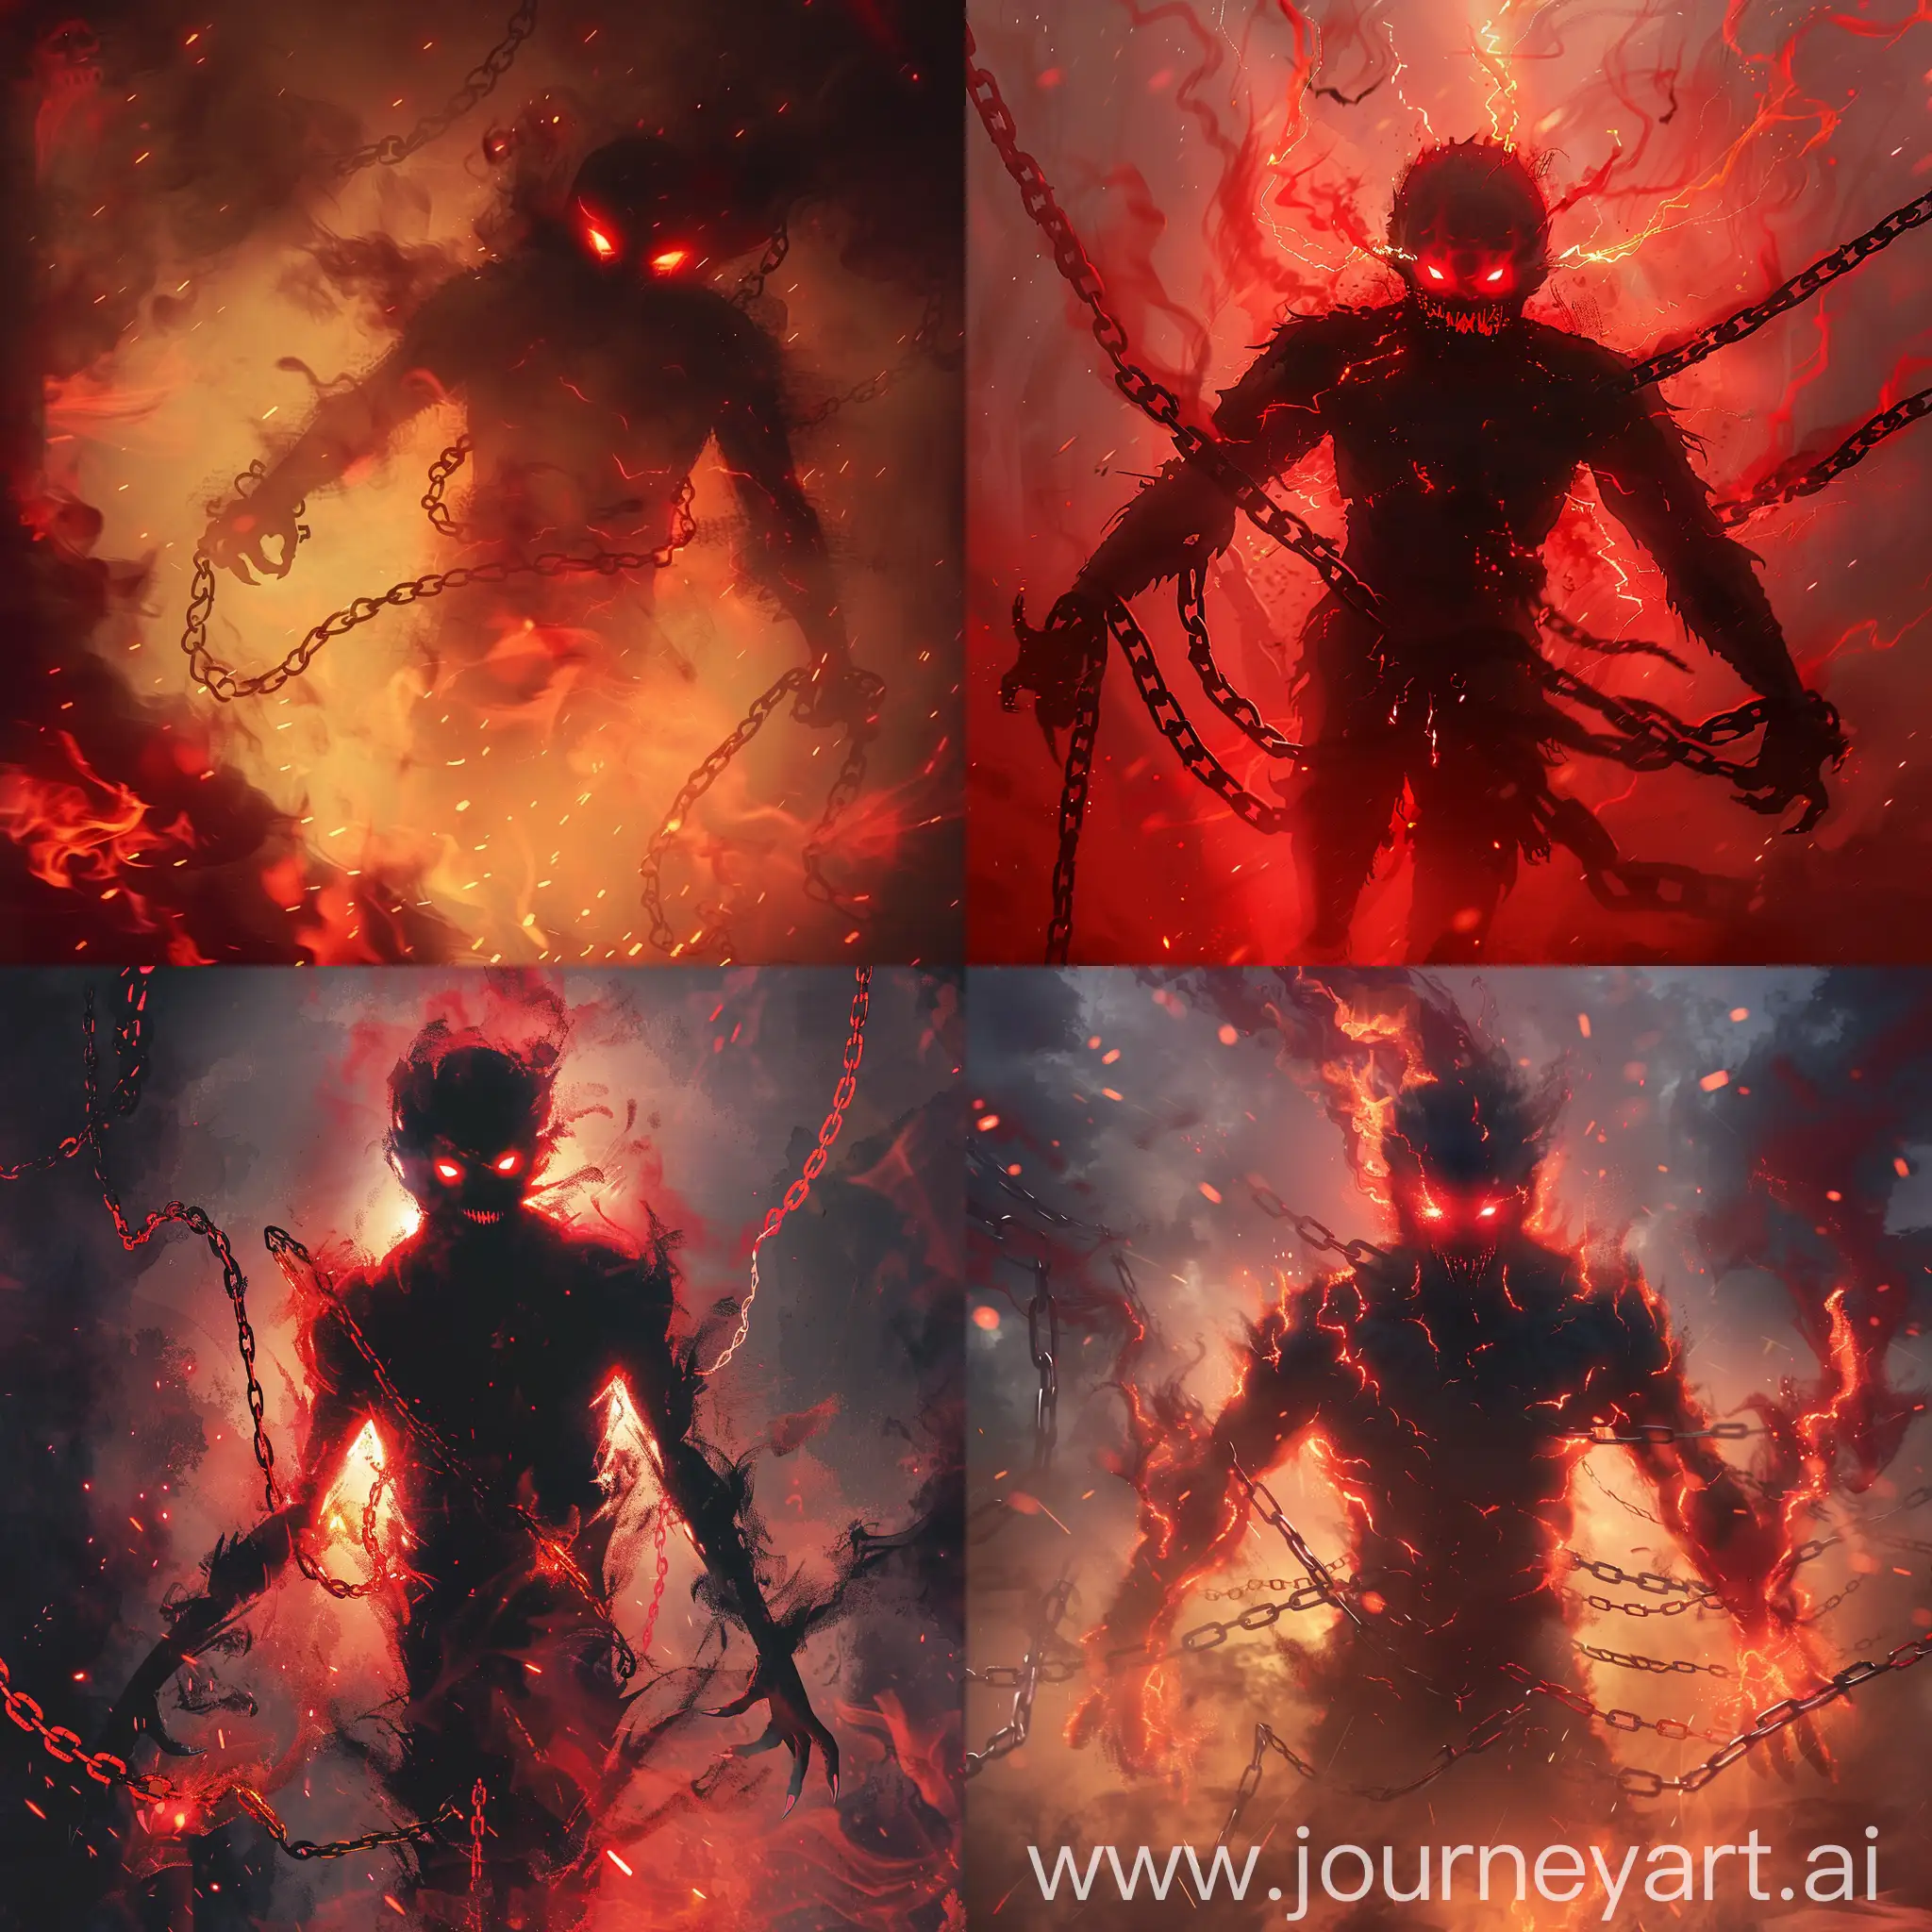 a shadow monster like human with red eyes, rage eyes, without mouth, chains flying around it, everything glows with red smoke and light